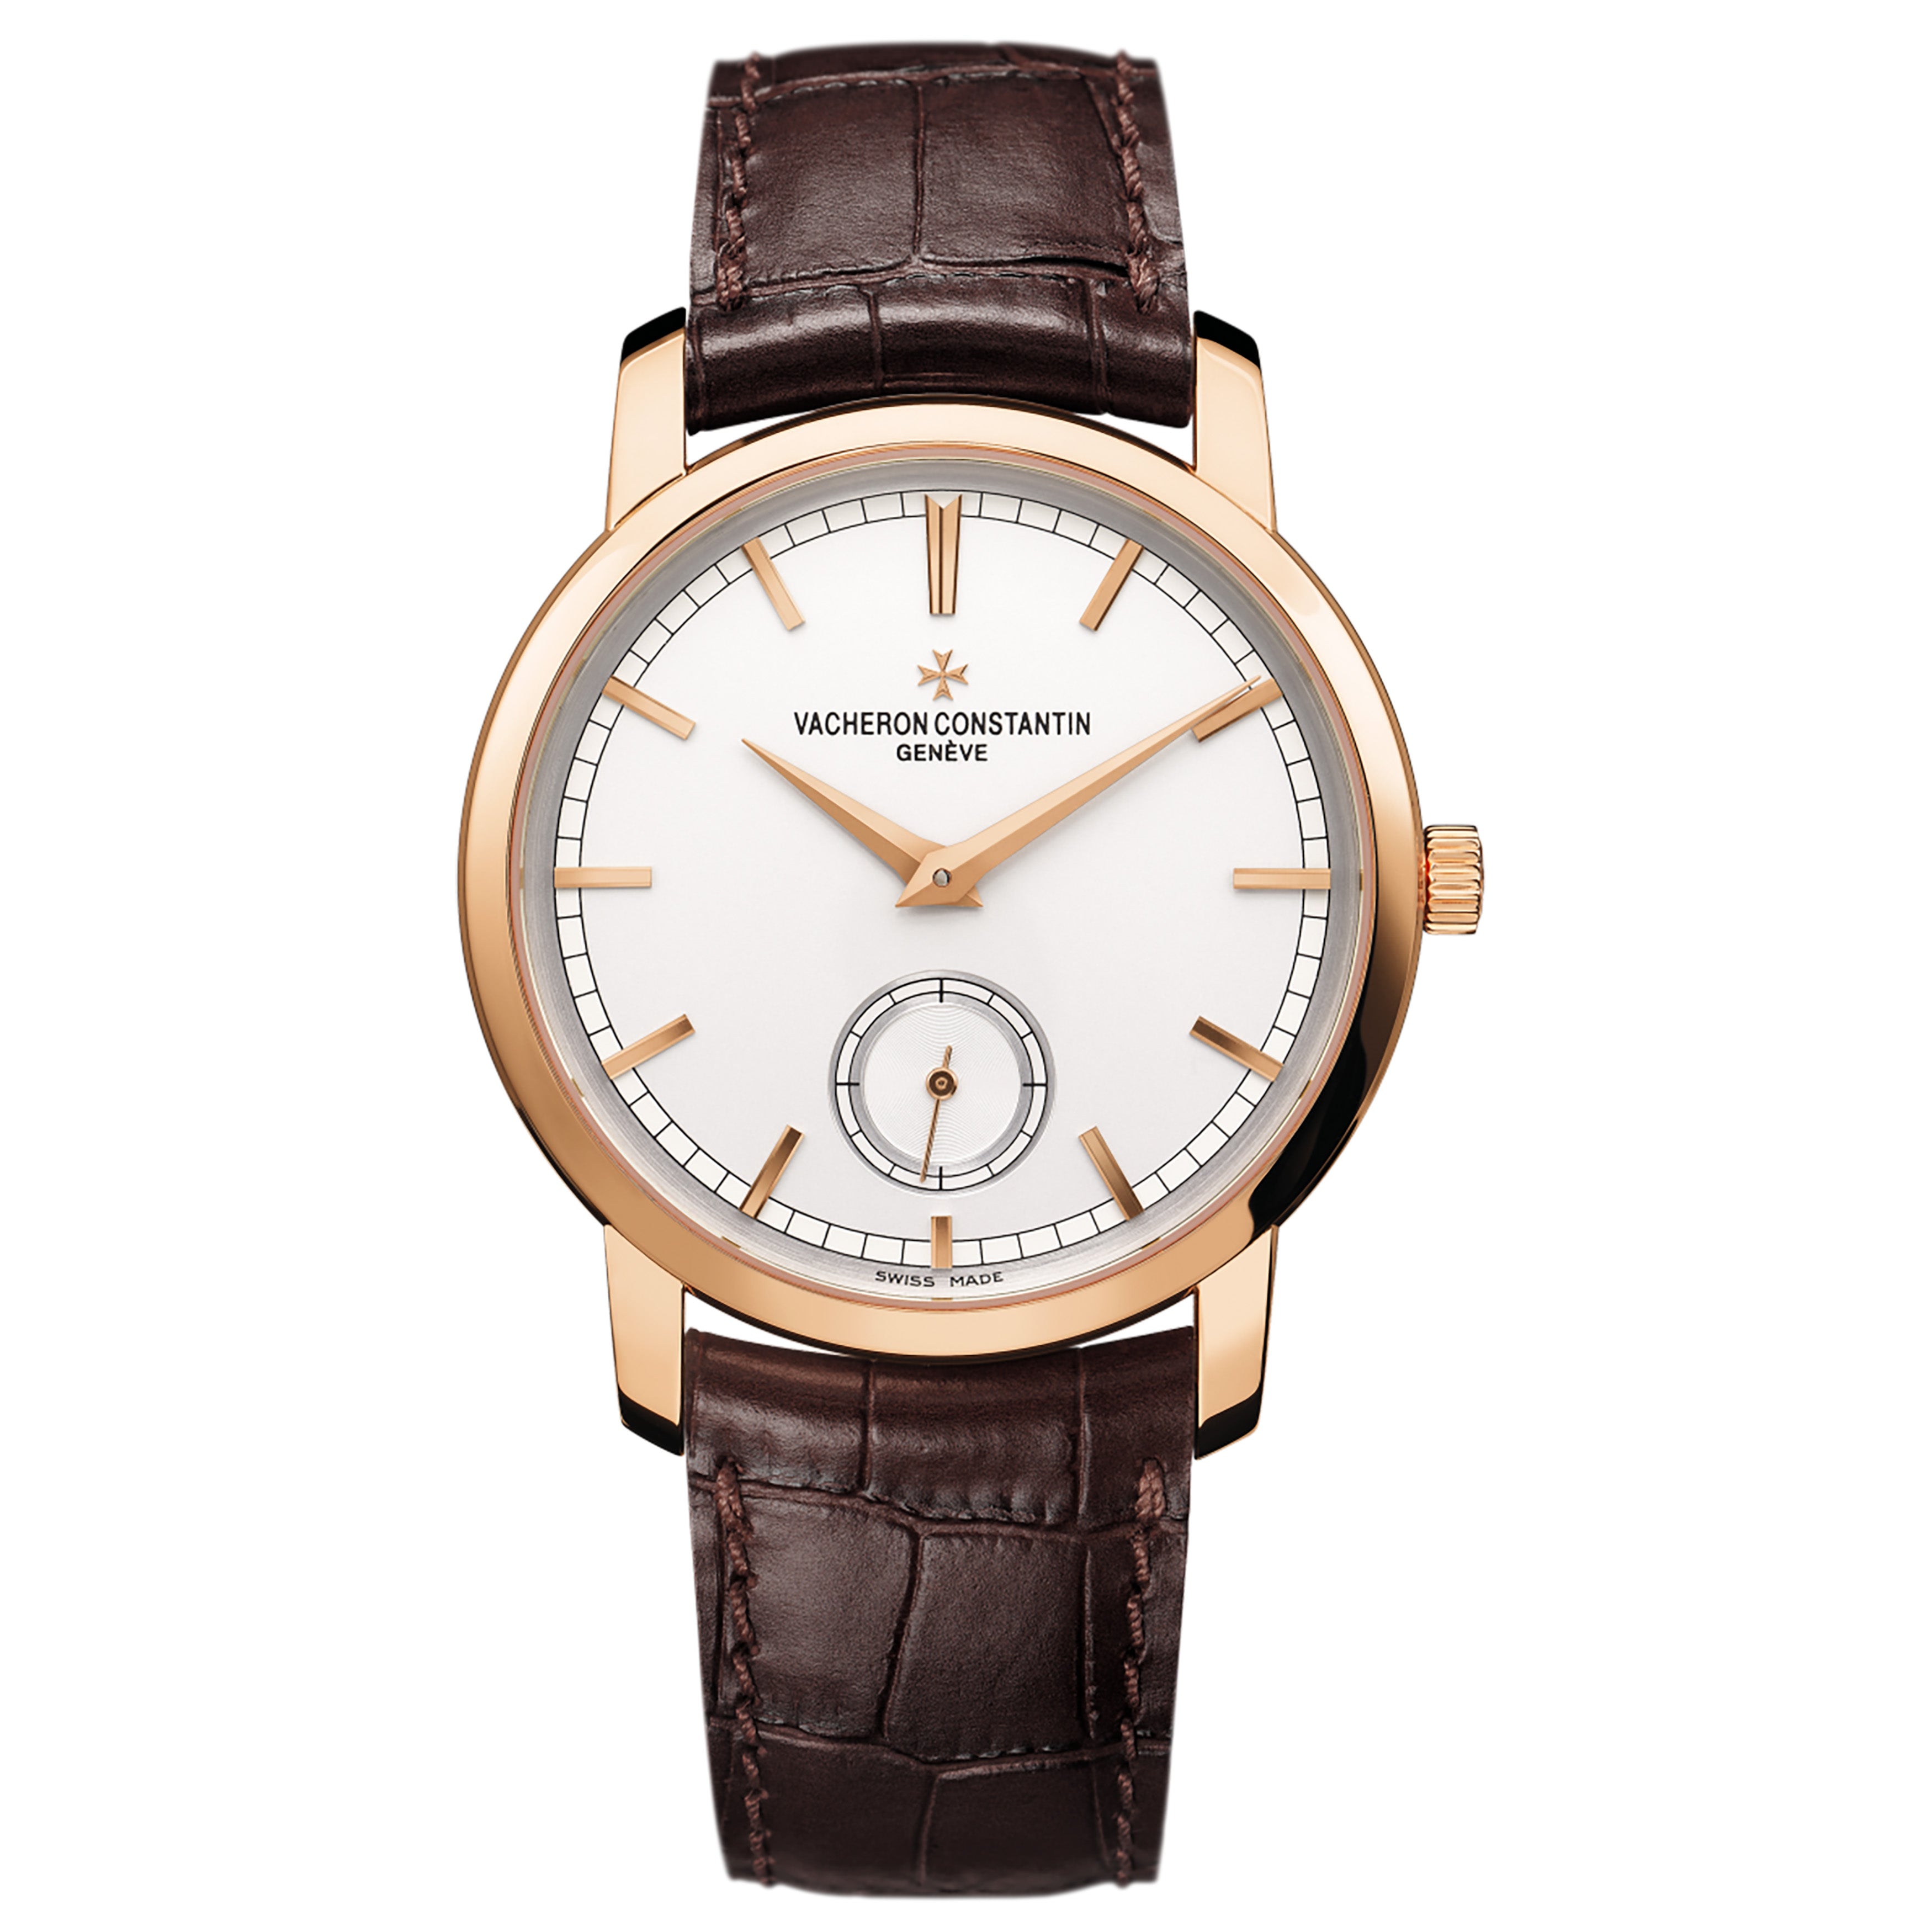 Vacheron Constantin Traditionnelle Manual-Winding, 38mm Silver Dial, 82172/000R-9382